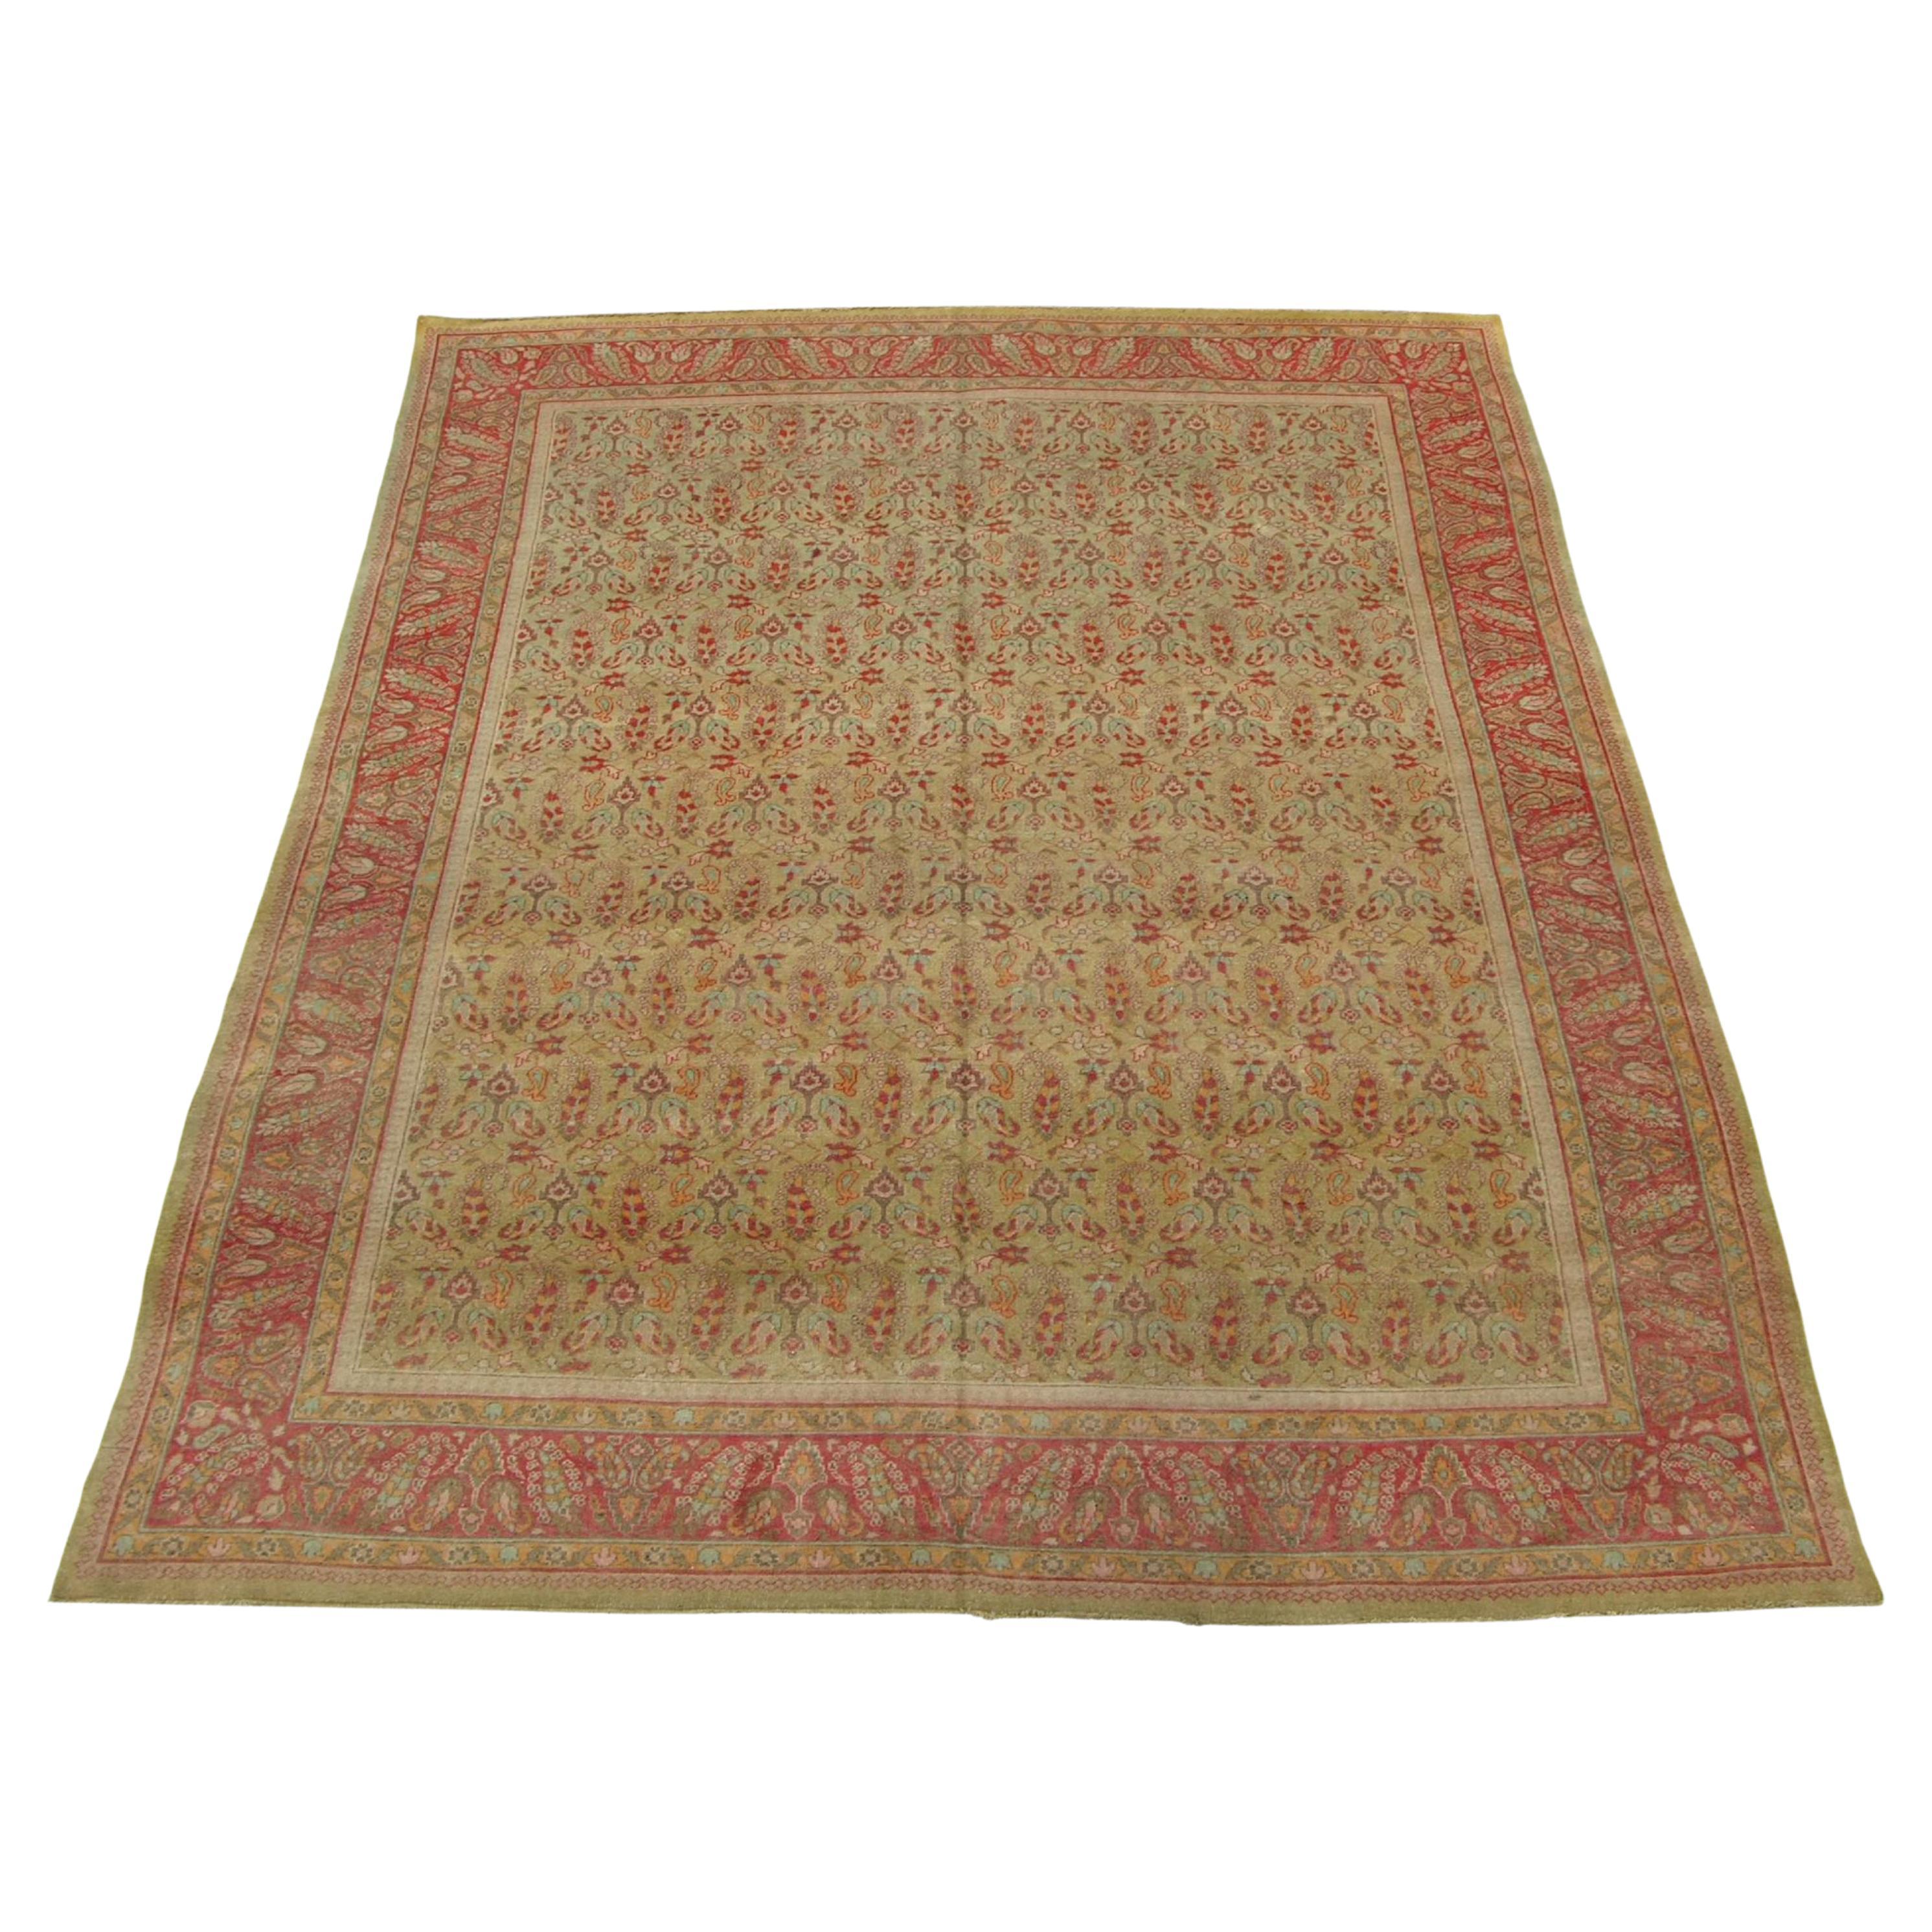 1900s Antique Indian Amritsar Rug - 11'10'' X 9'6'' For Sale